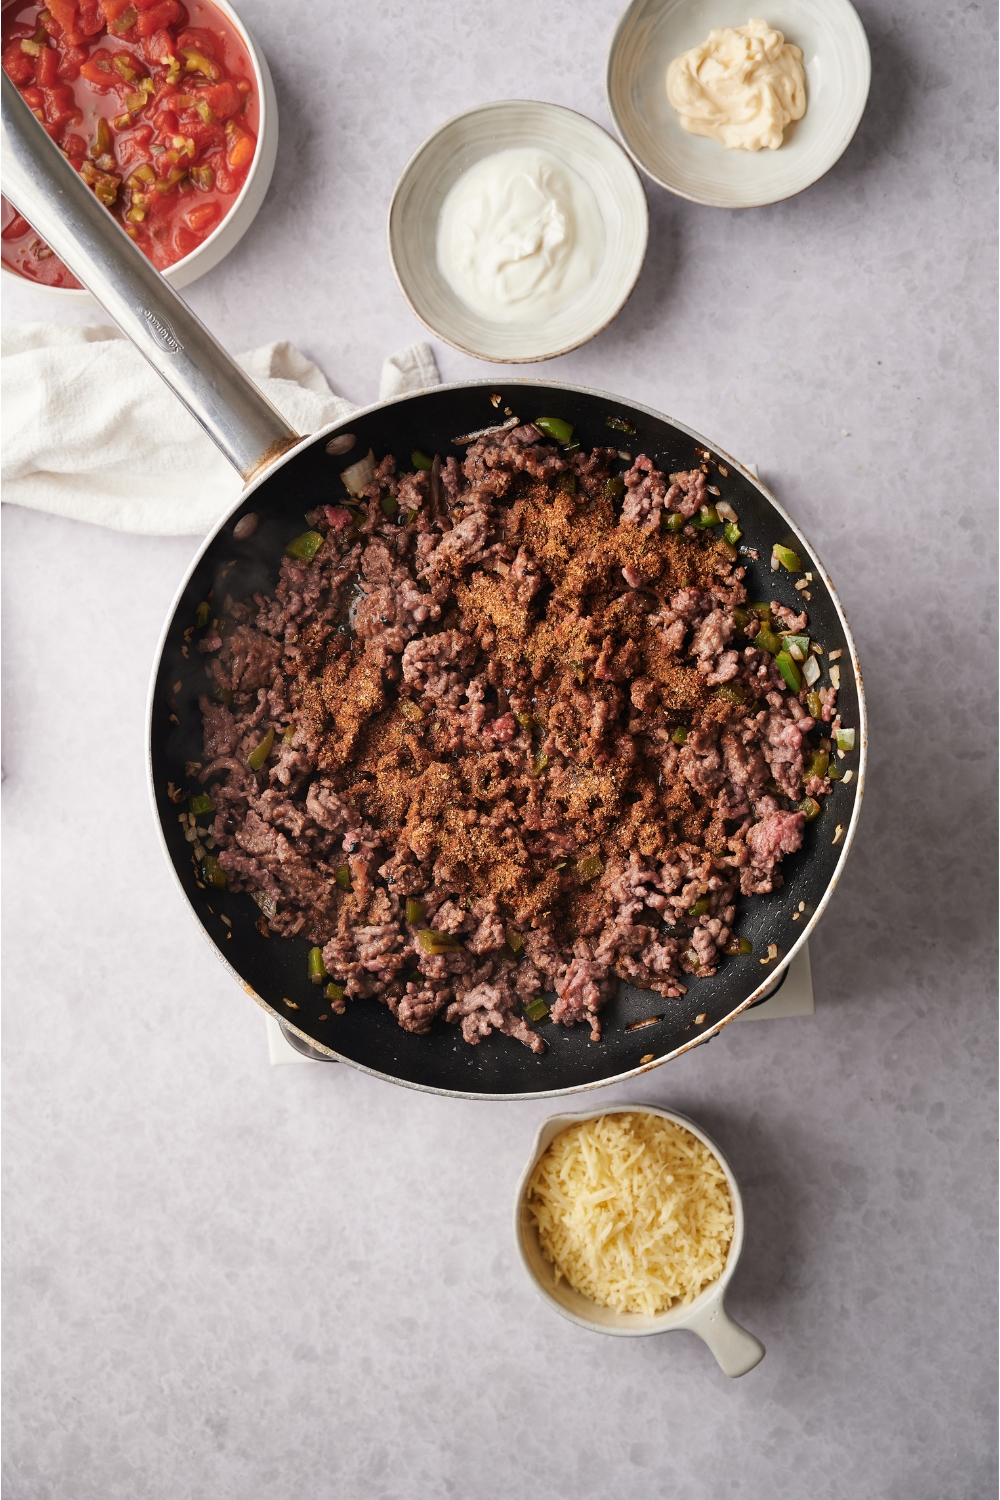 A black skillet filled with ground beef, peppers, onions, and seasoning. Surrounding the skillet are bowls of shredded cheese, sour cream, mayo and salsa.